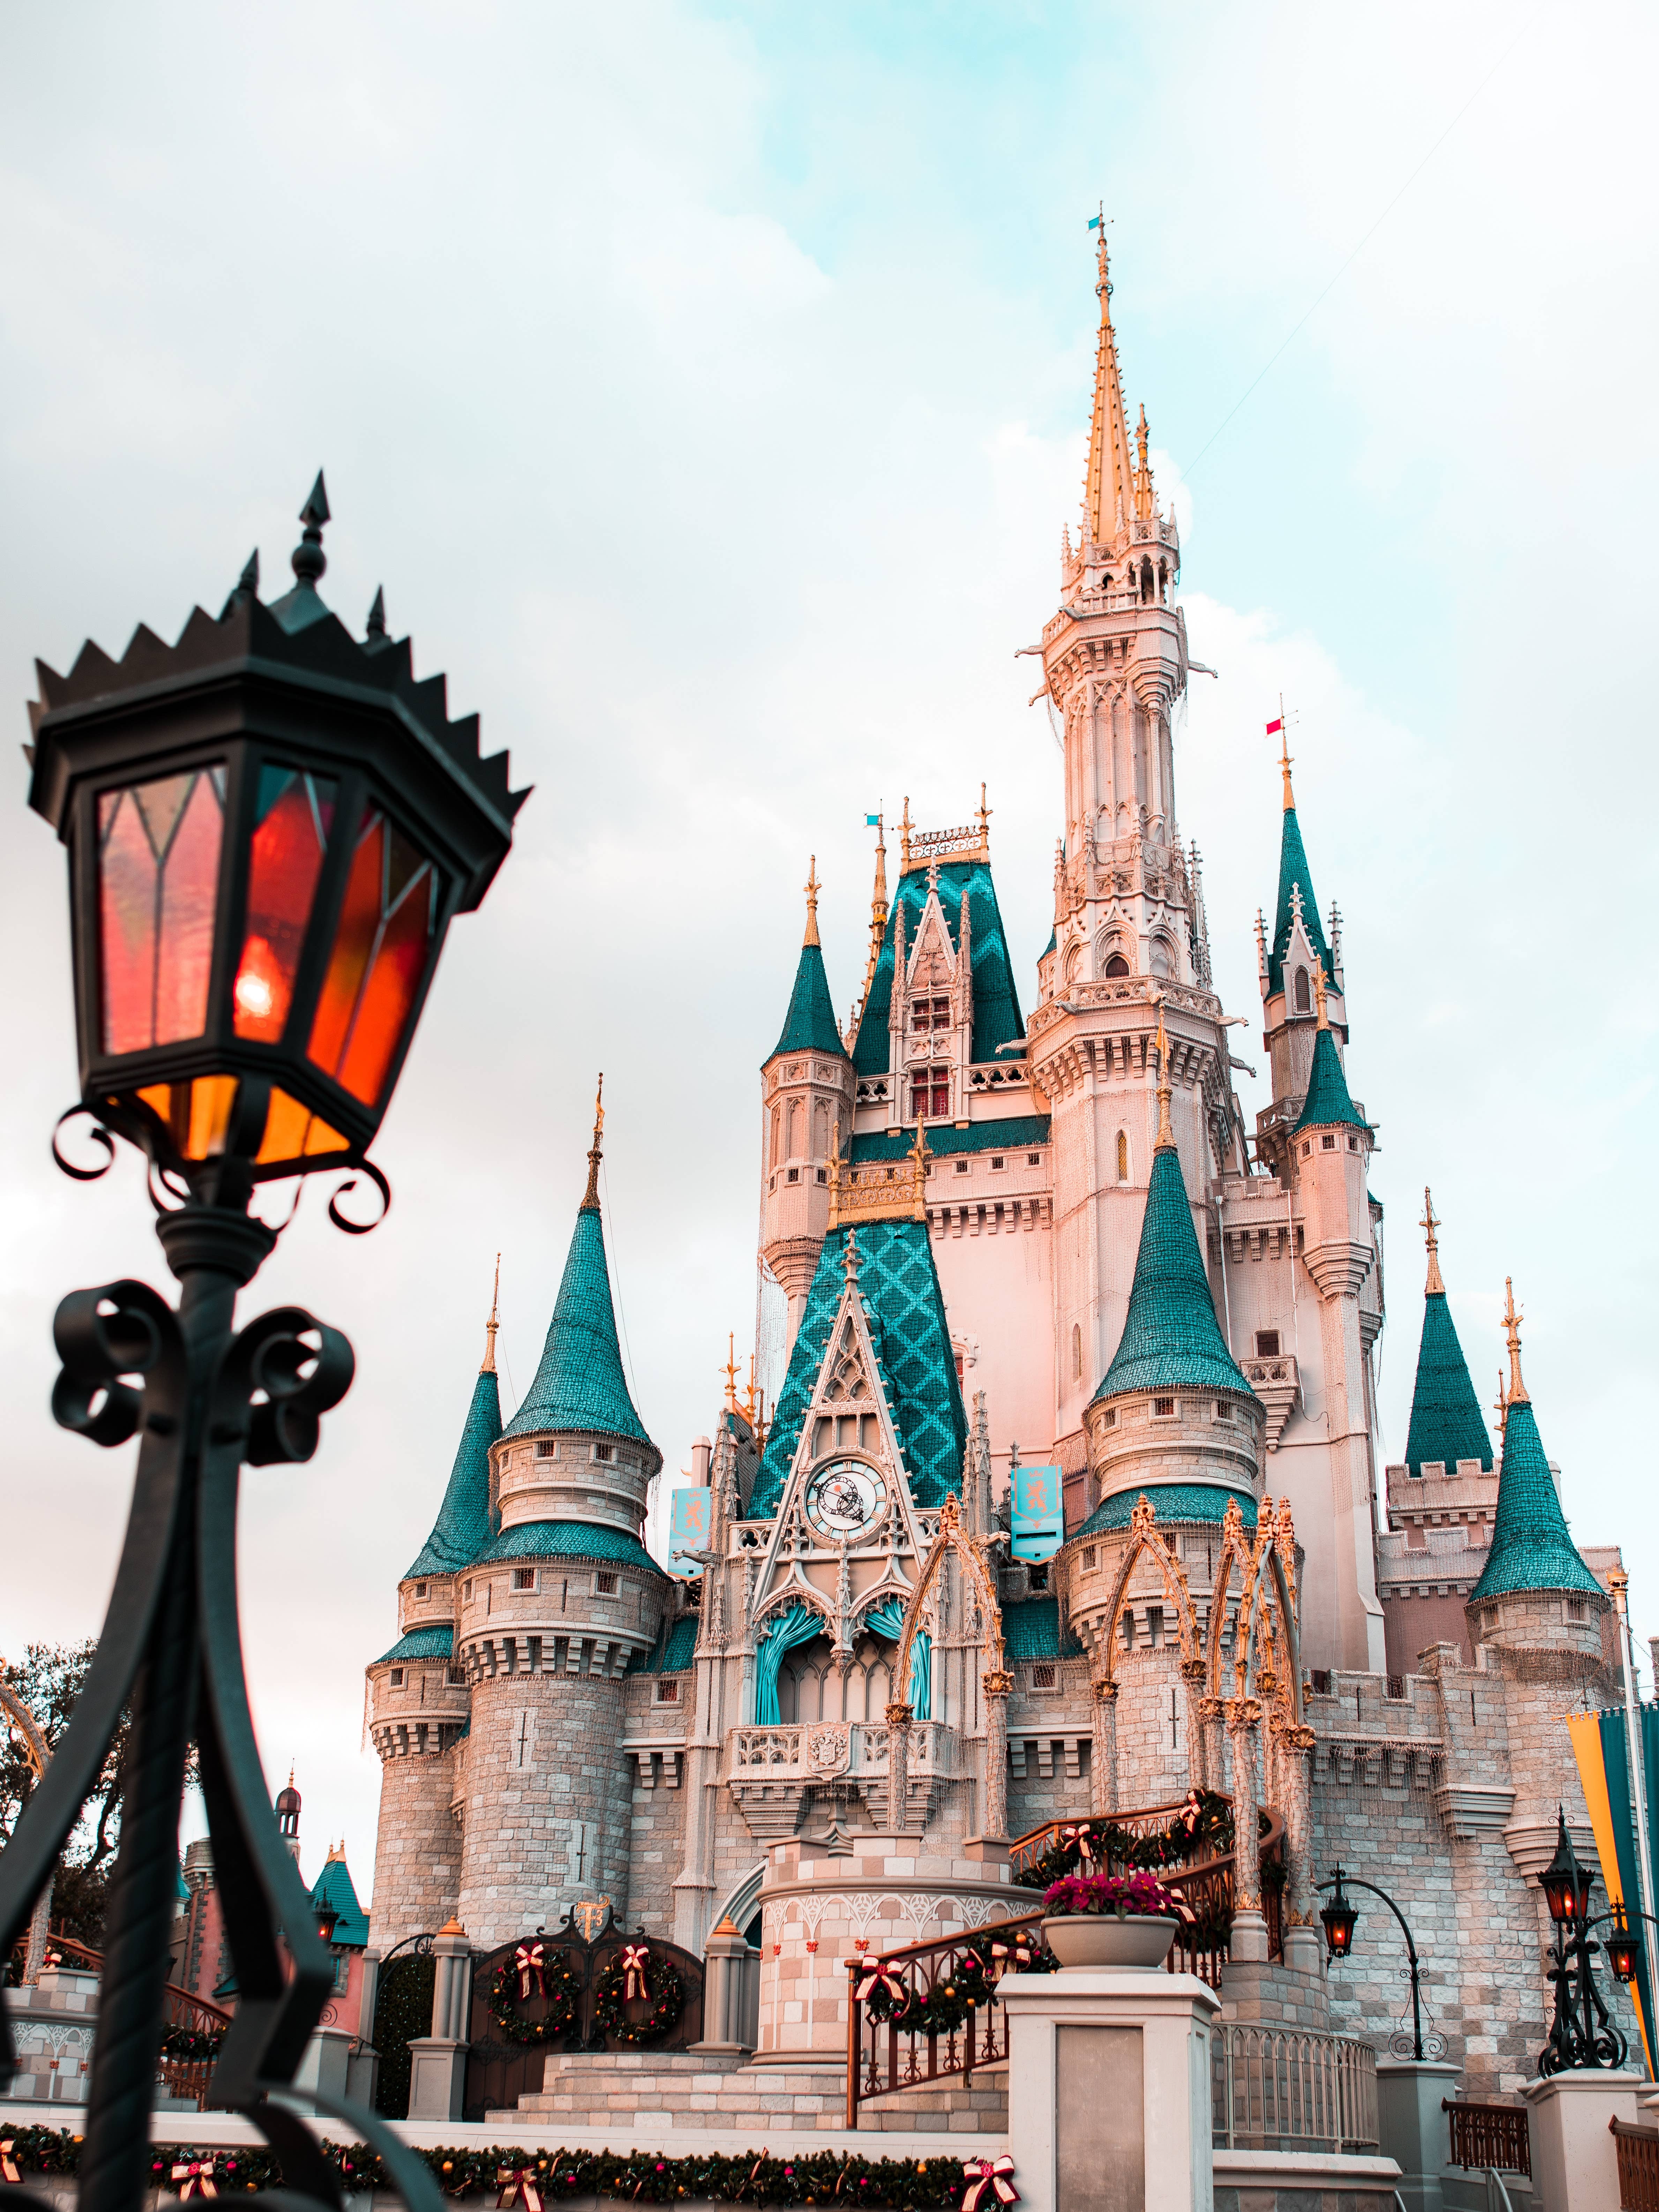 We Bet You Didn’t Know About These Disney World Secrets